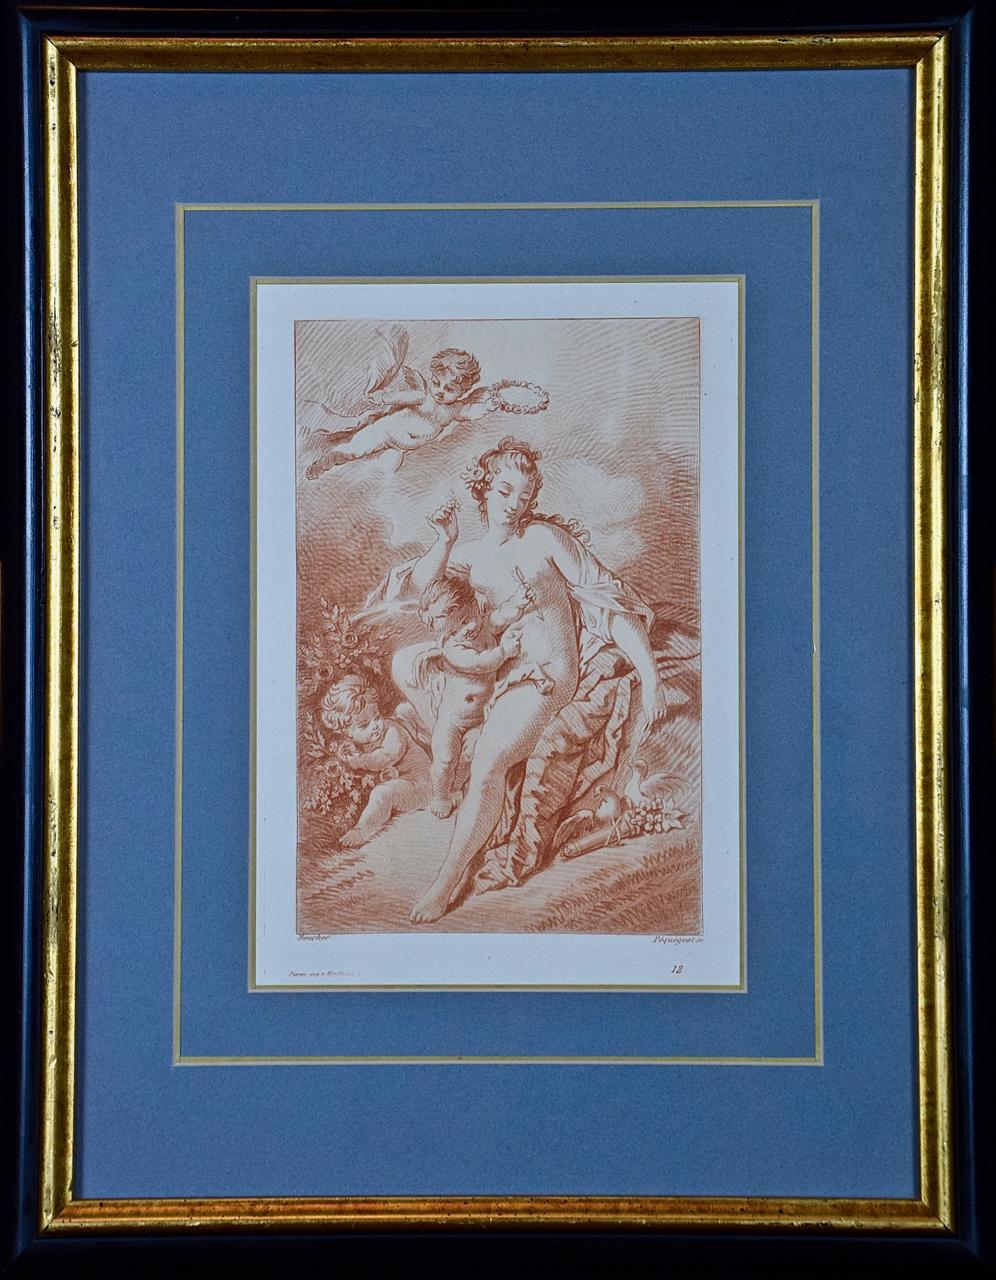 A Pair of Romantic Etchings of Women with Cherubs by Pequegnot after Boucher  - Print by (After) Francois Boucher